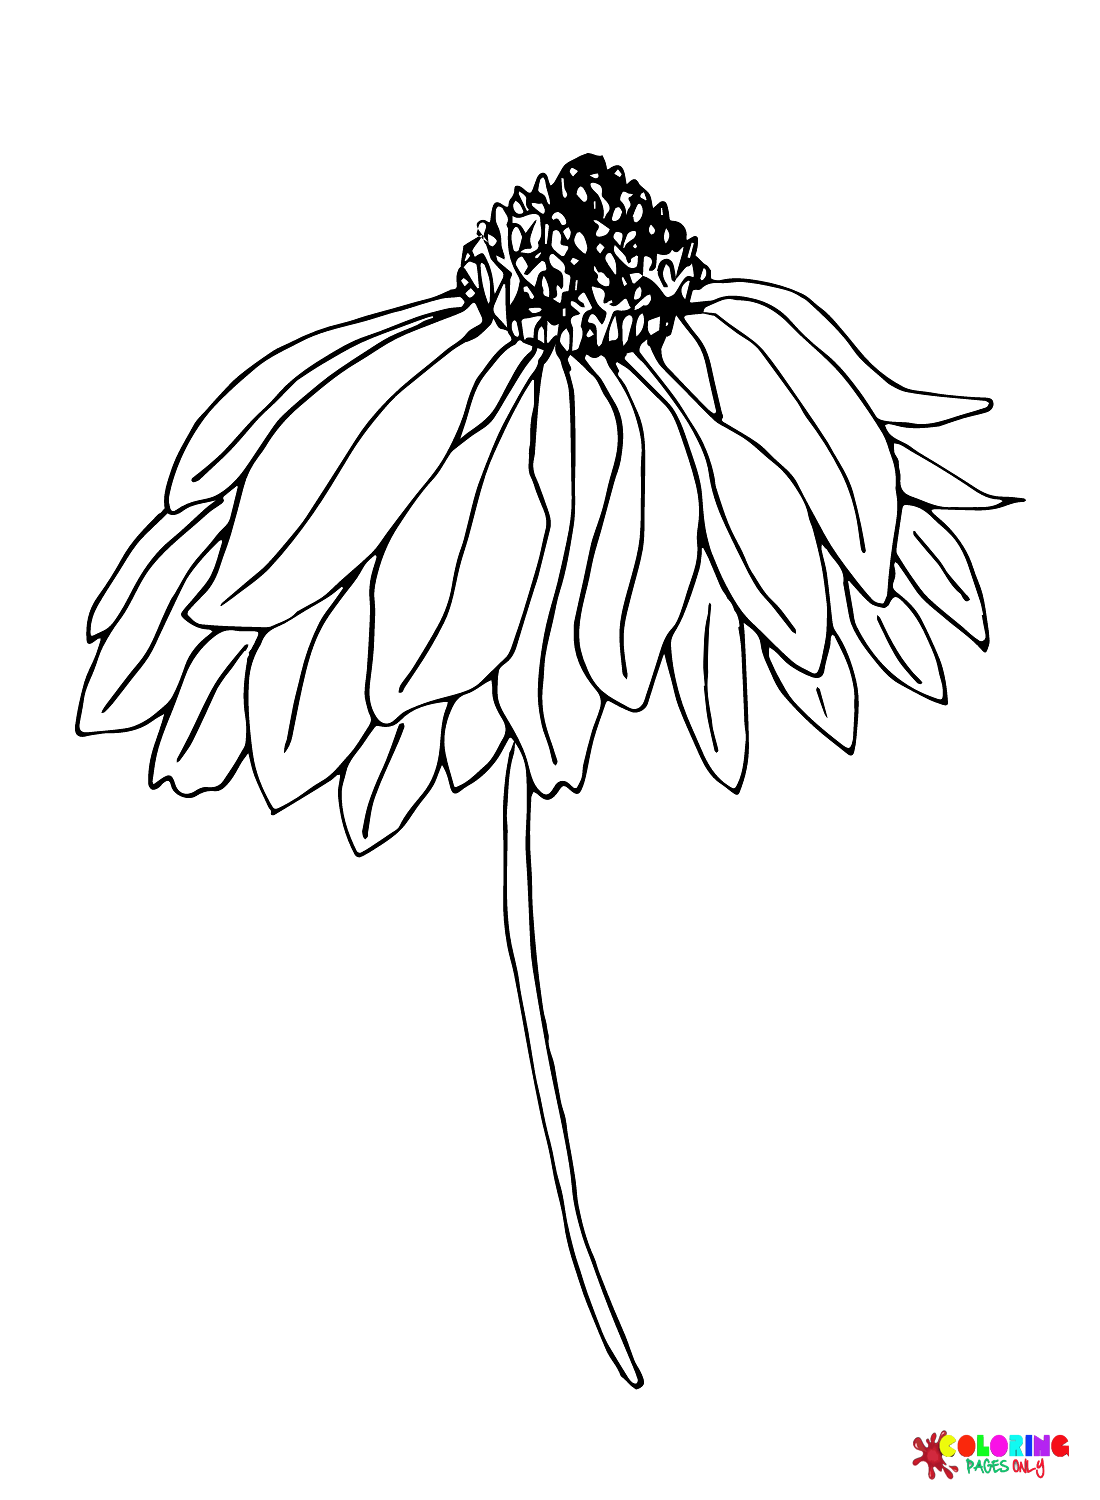 Daisy coloring pages printable for free download